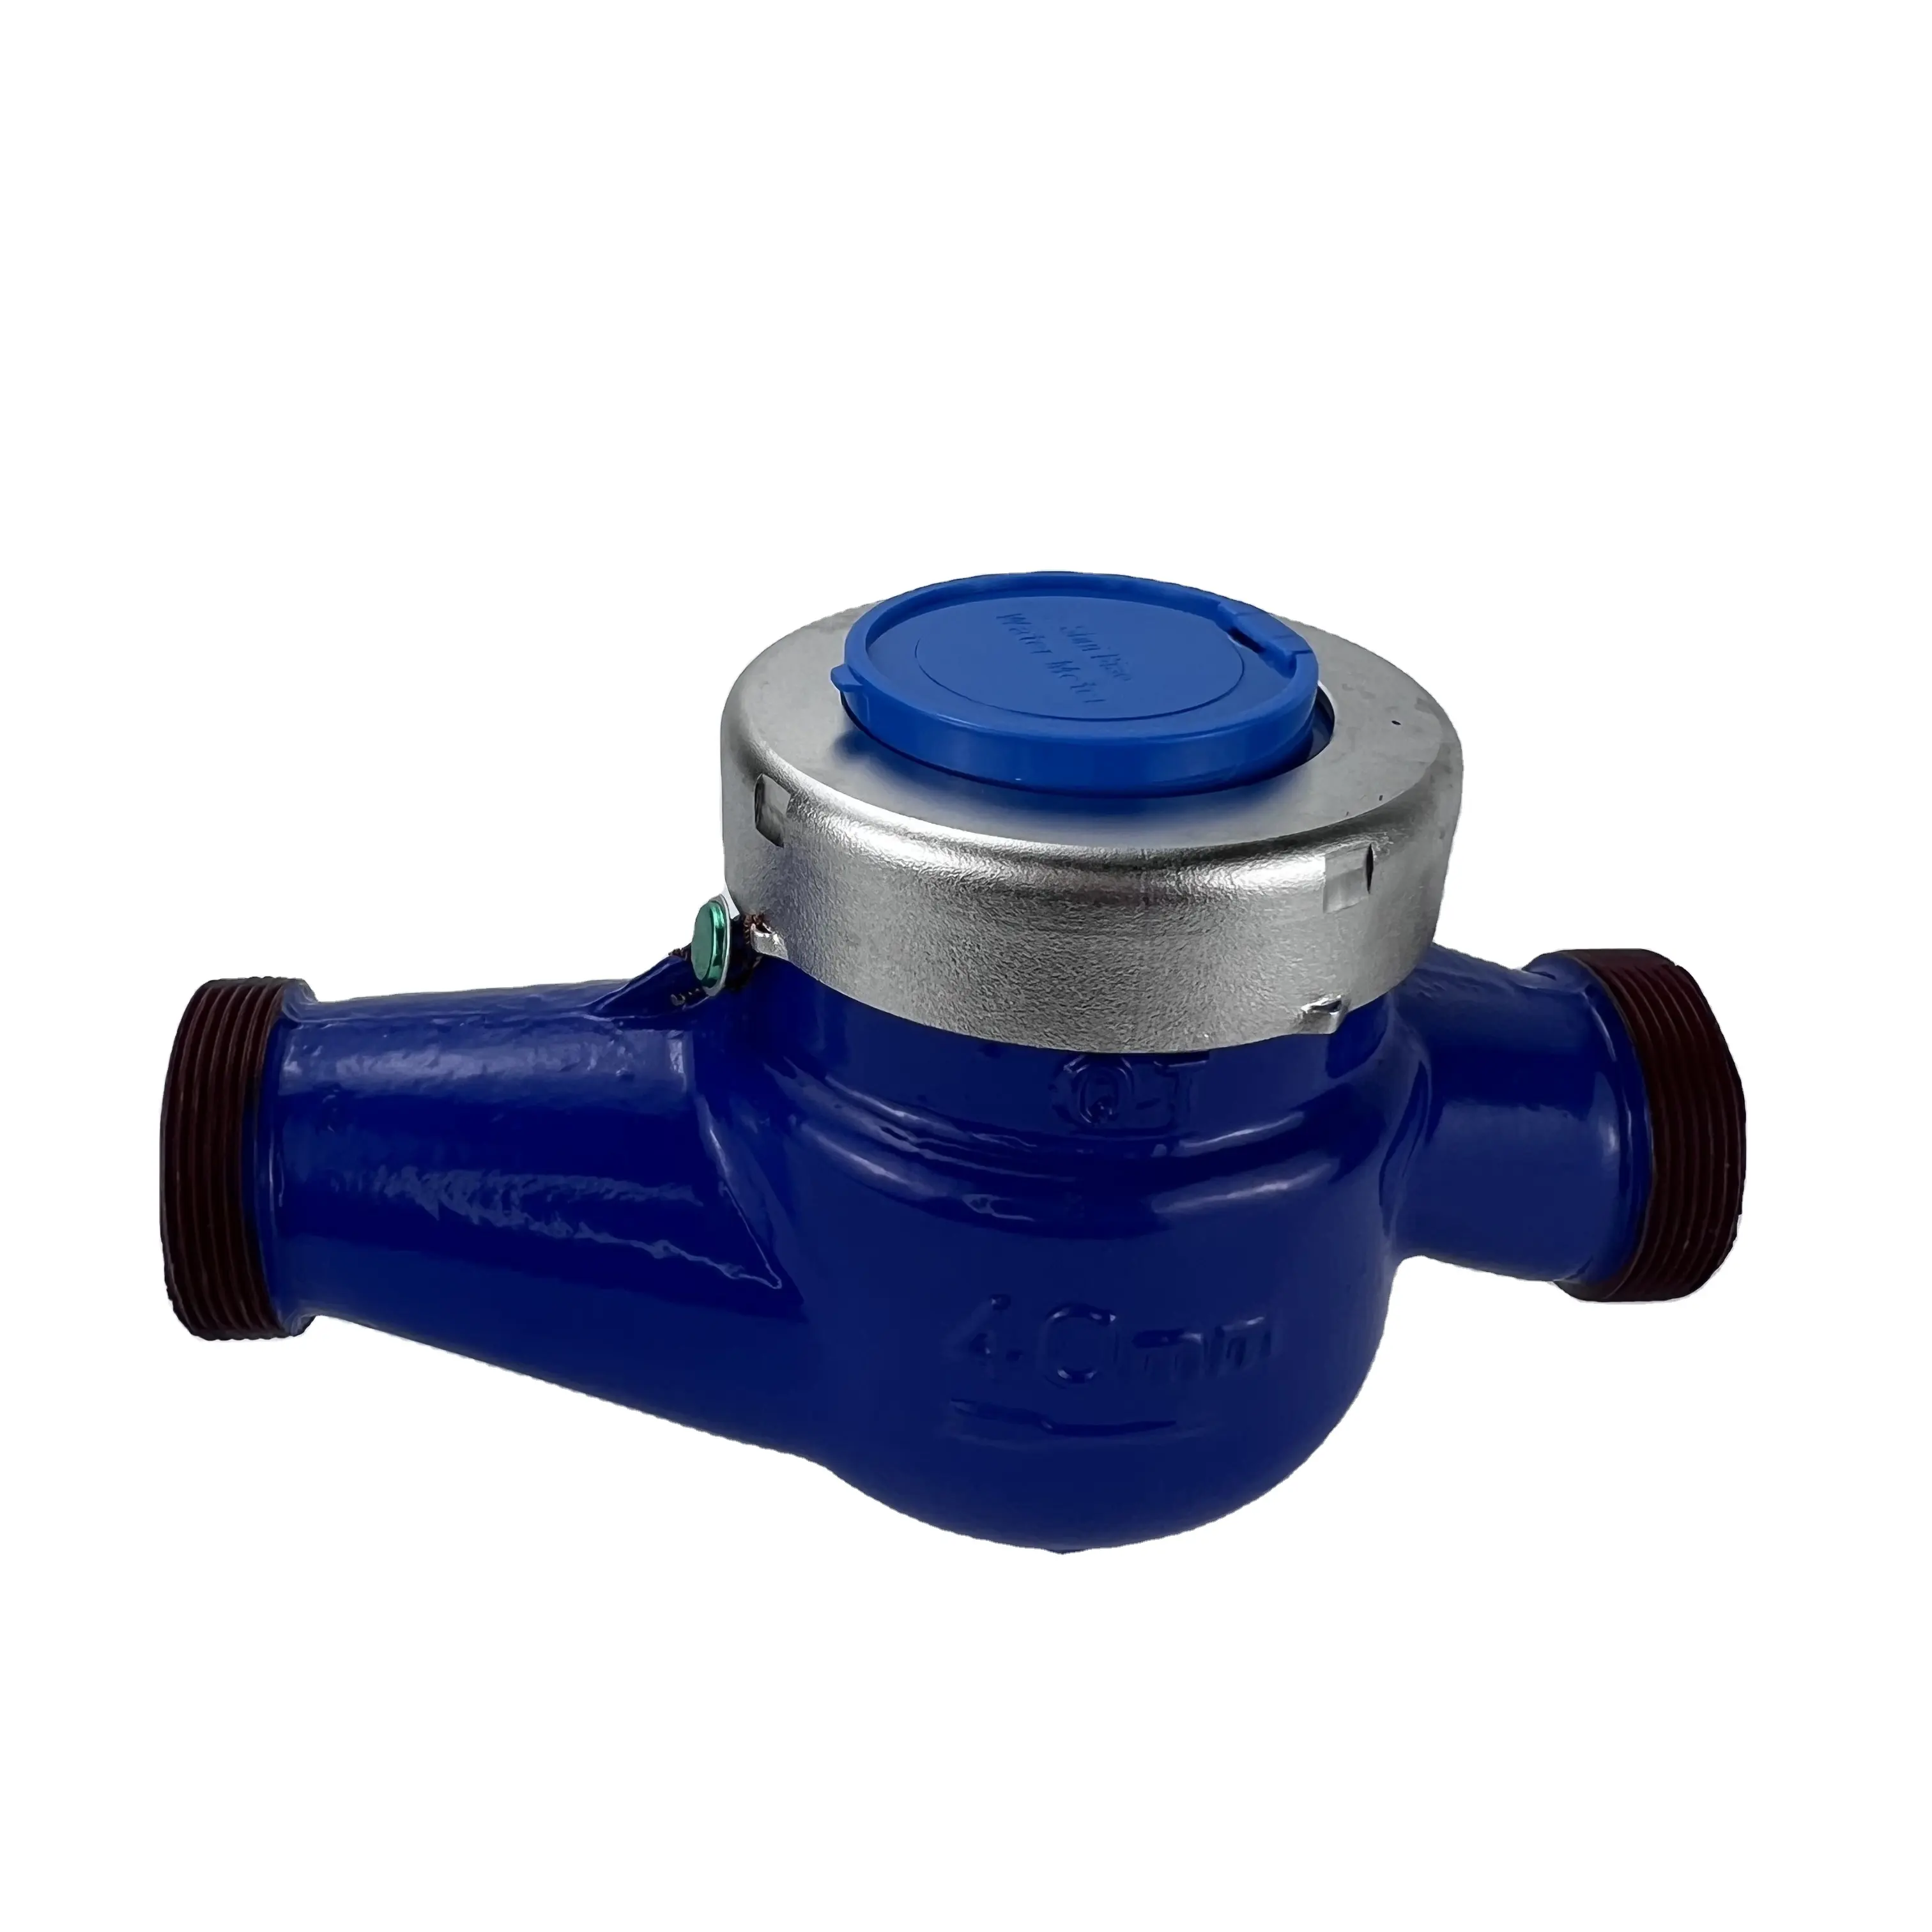 IP68 DN40mm Cast Iron Mechanical Cold/Hot Water Meter